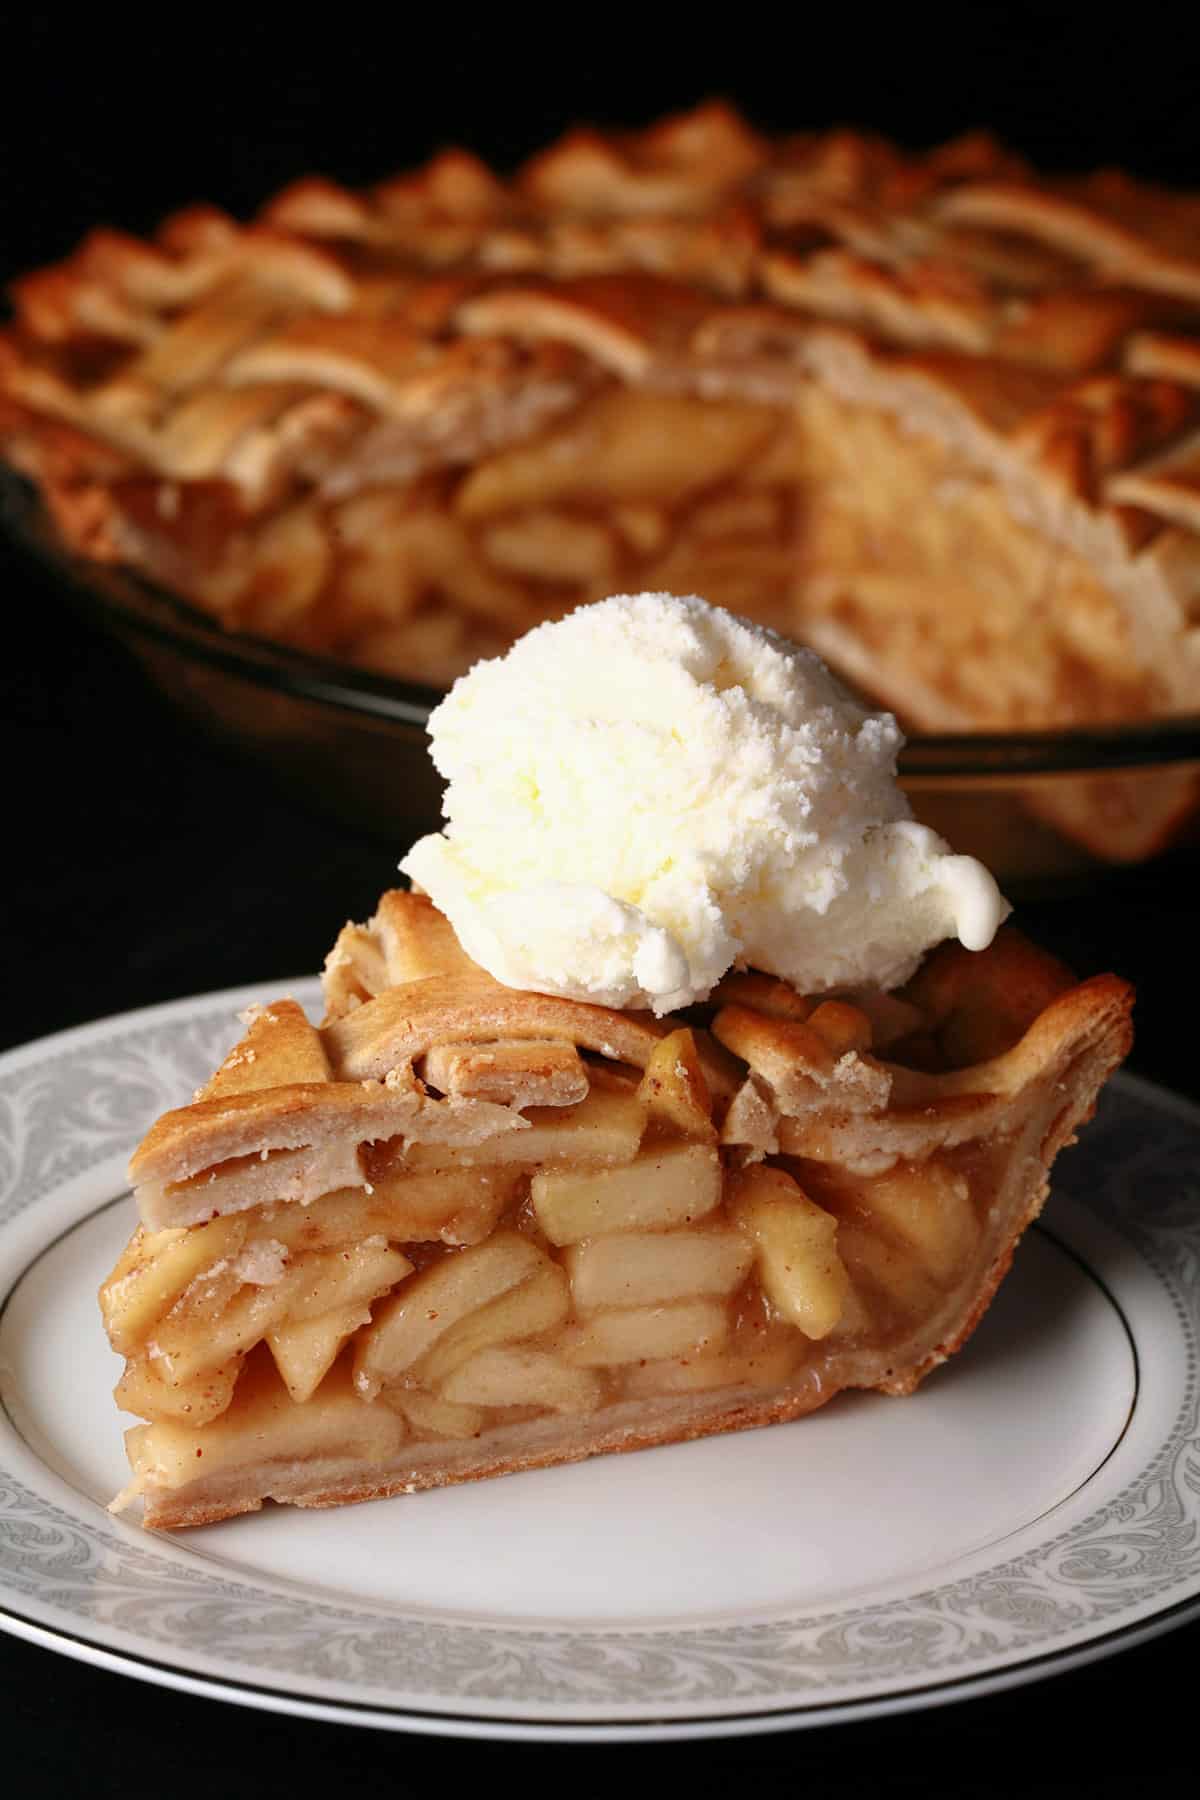 A slice of lattice top gluten free apple pie on a plate, in front of the rest of the pie.